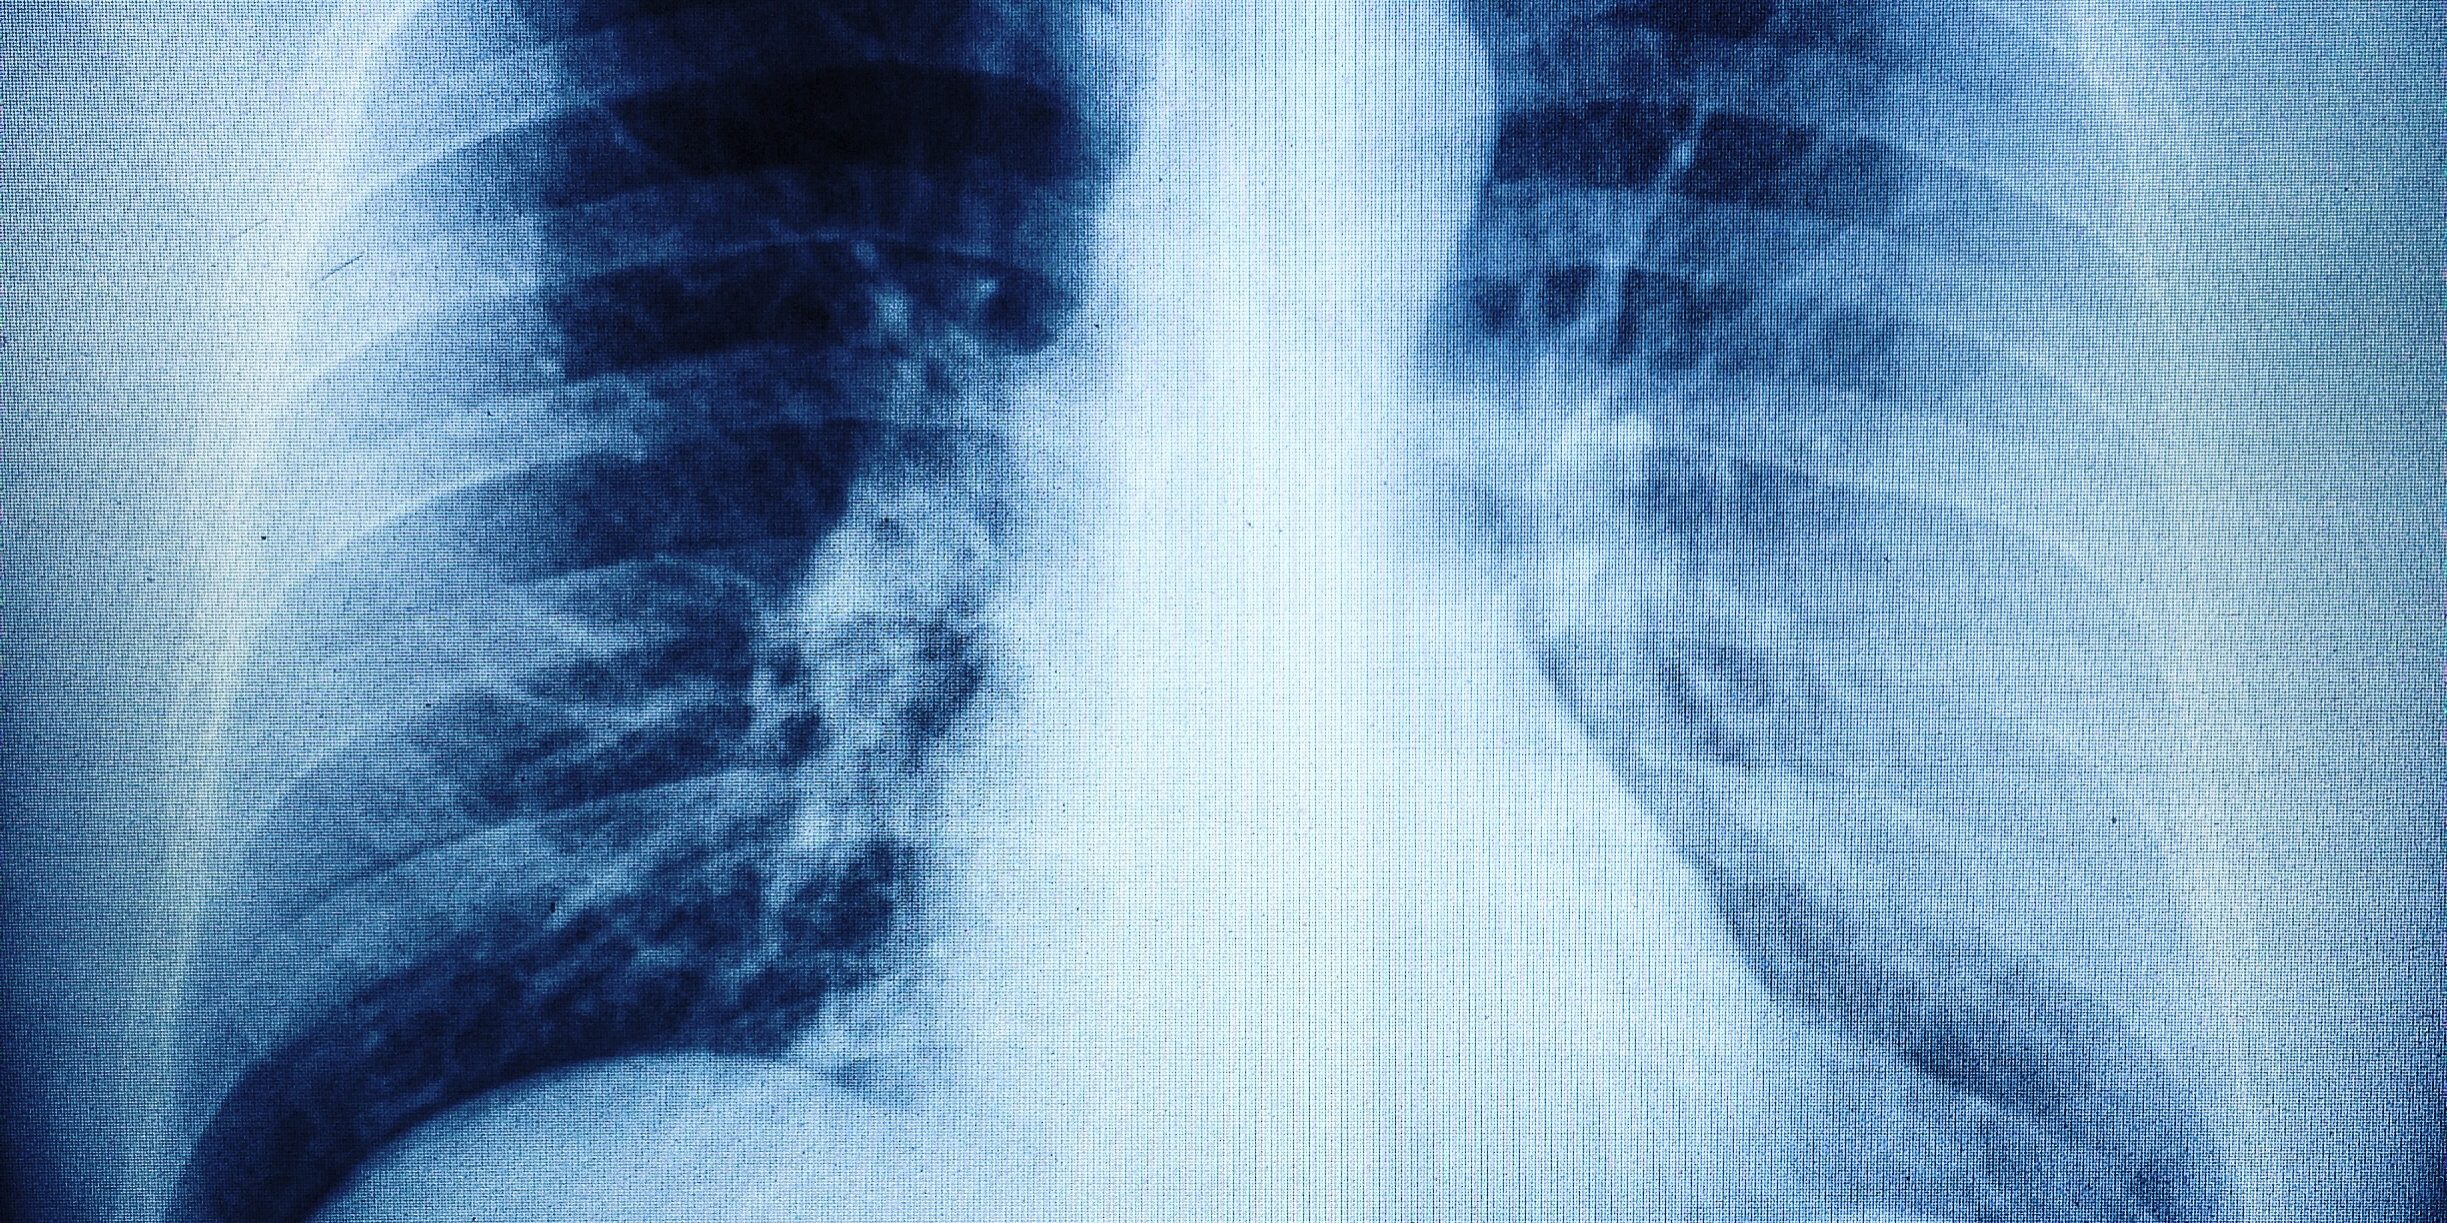 X-Ray of the lungs